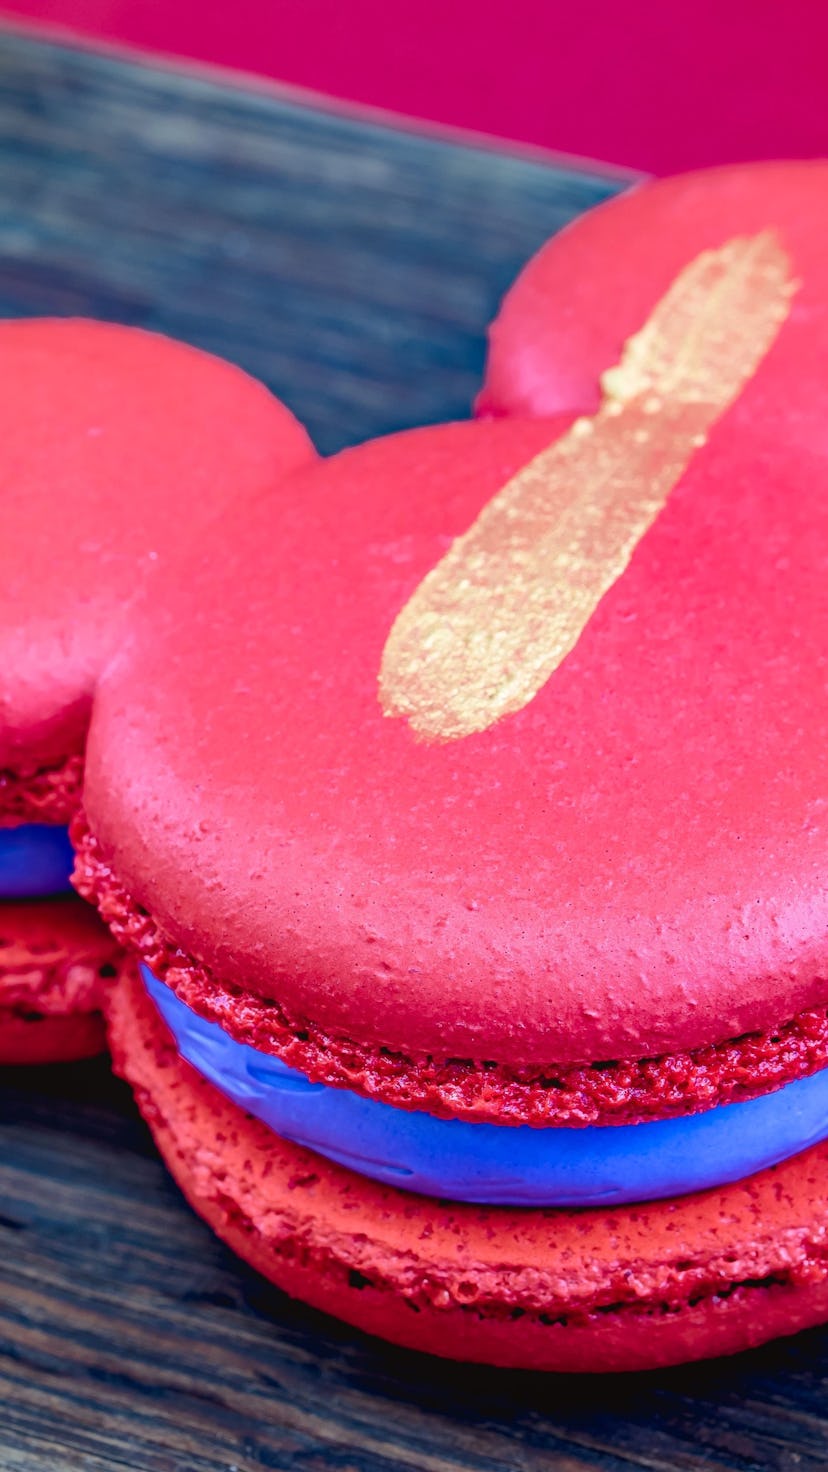 Disneyland's Lunar New Year 2022 food and drink includes a Mickey-shaped macaron.